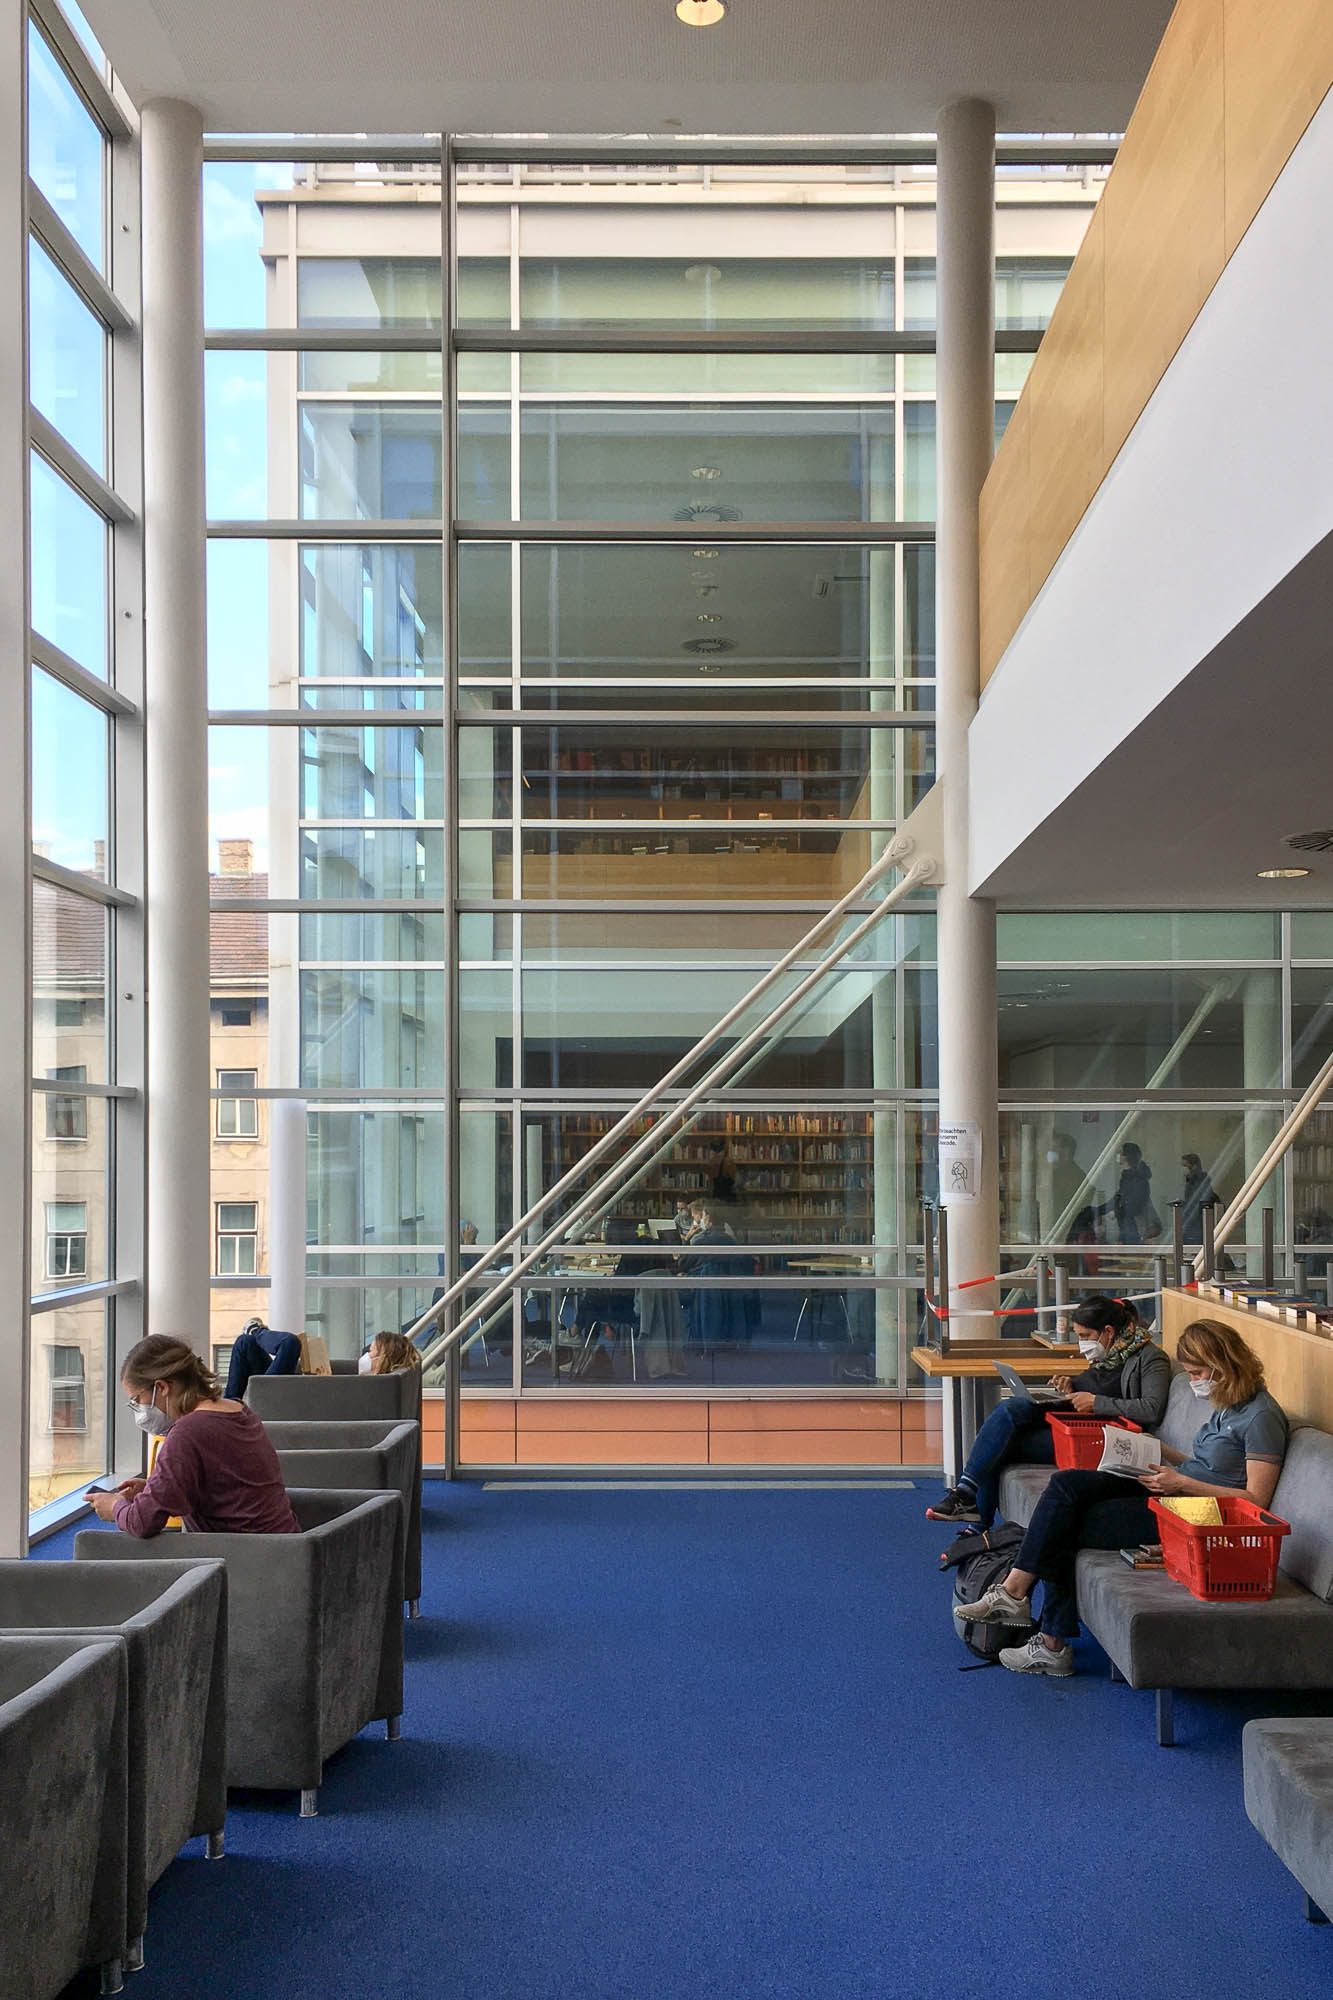 Interior view of a contemporary library. It's a double-height glass-enclosed room with blue carpeting and patrons wearing face masks sitting on couches, reading. Another similar room can be seen across a light well in front of the camera.